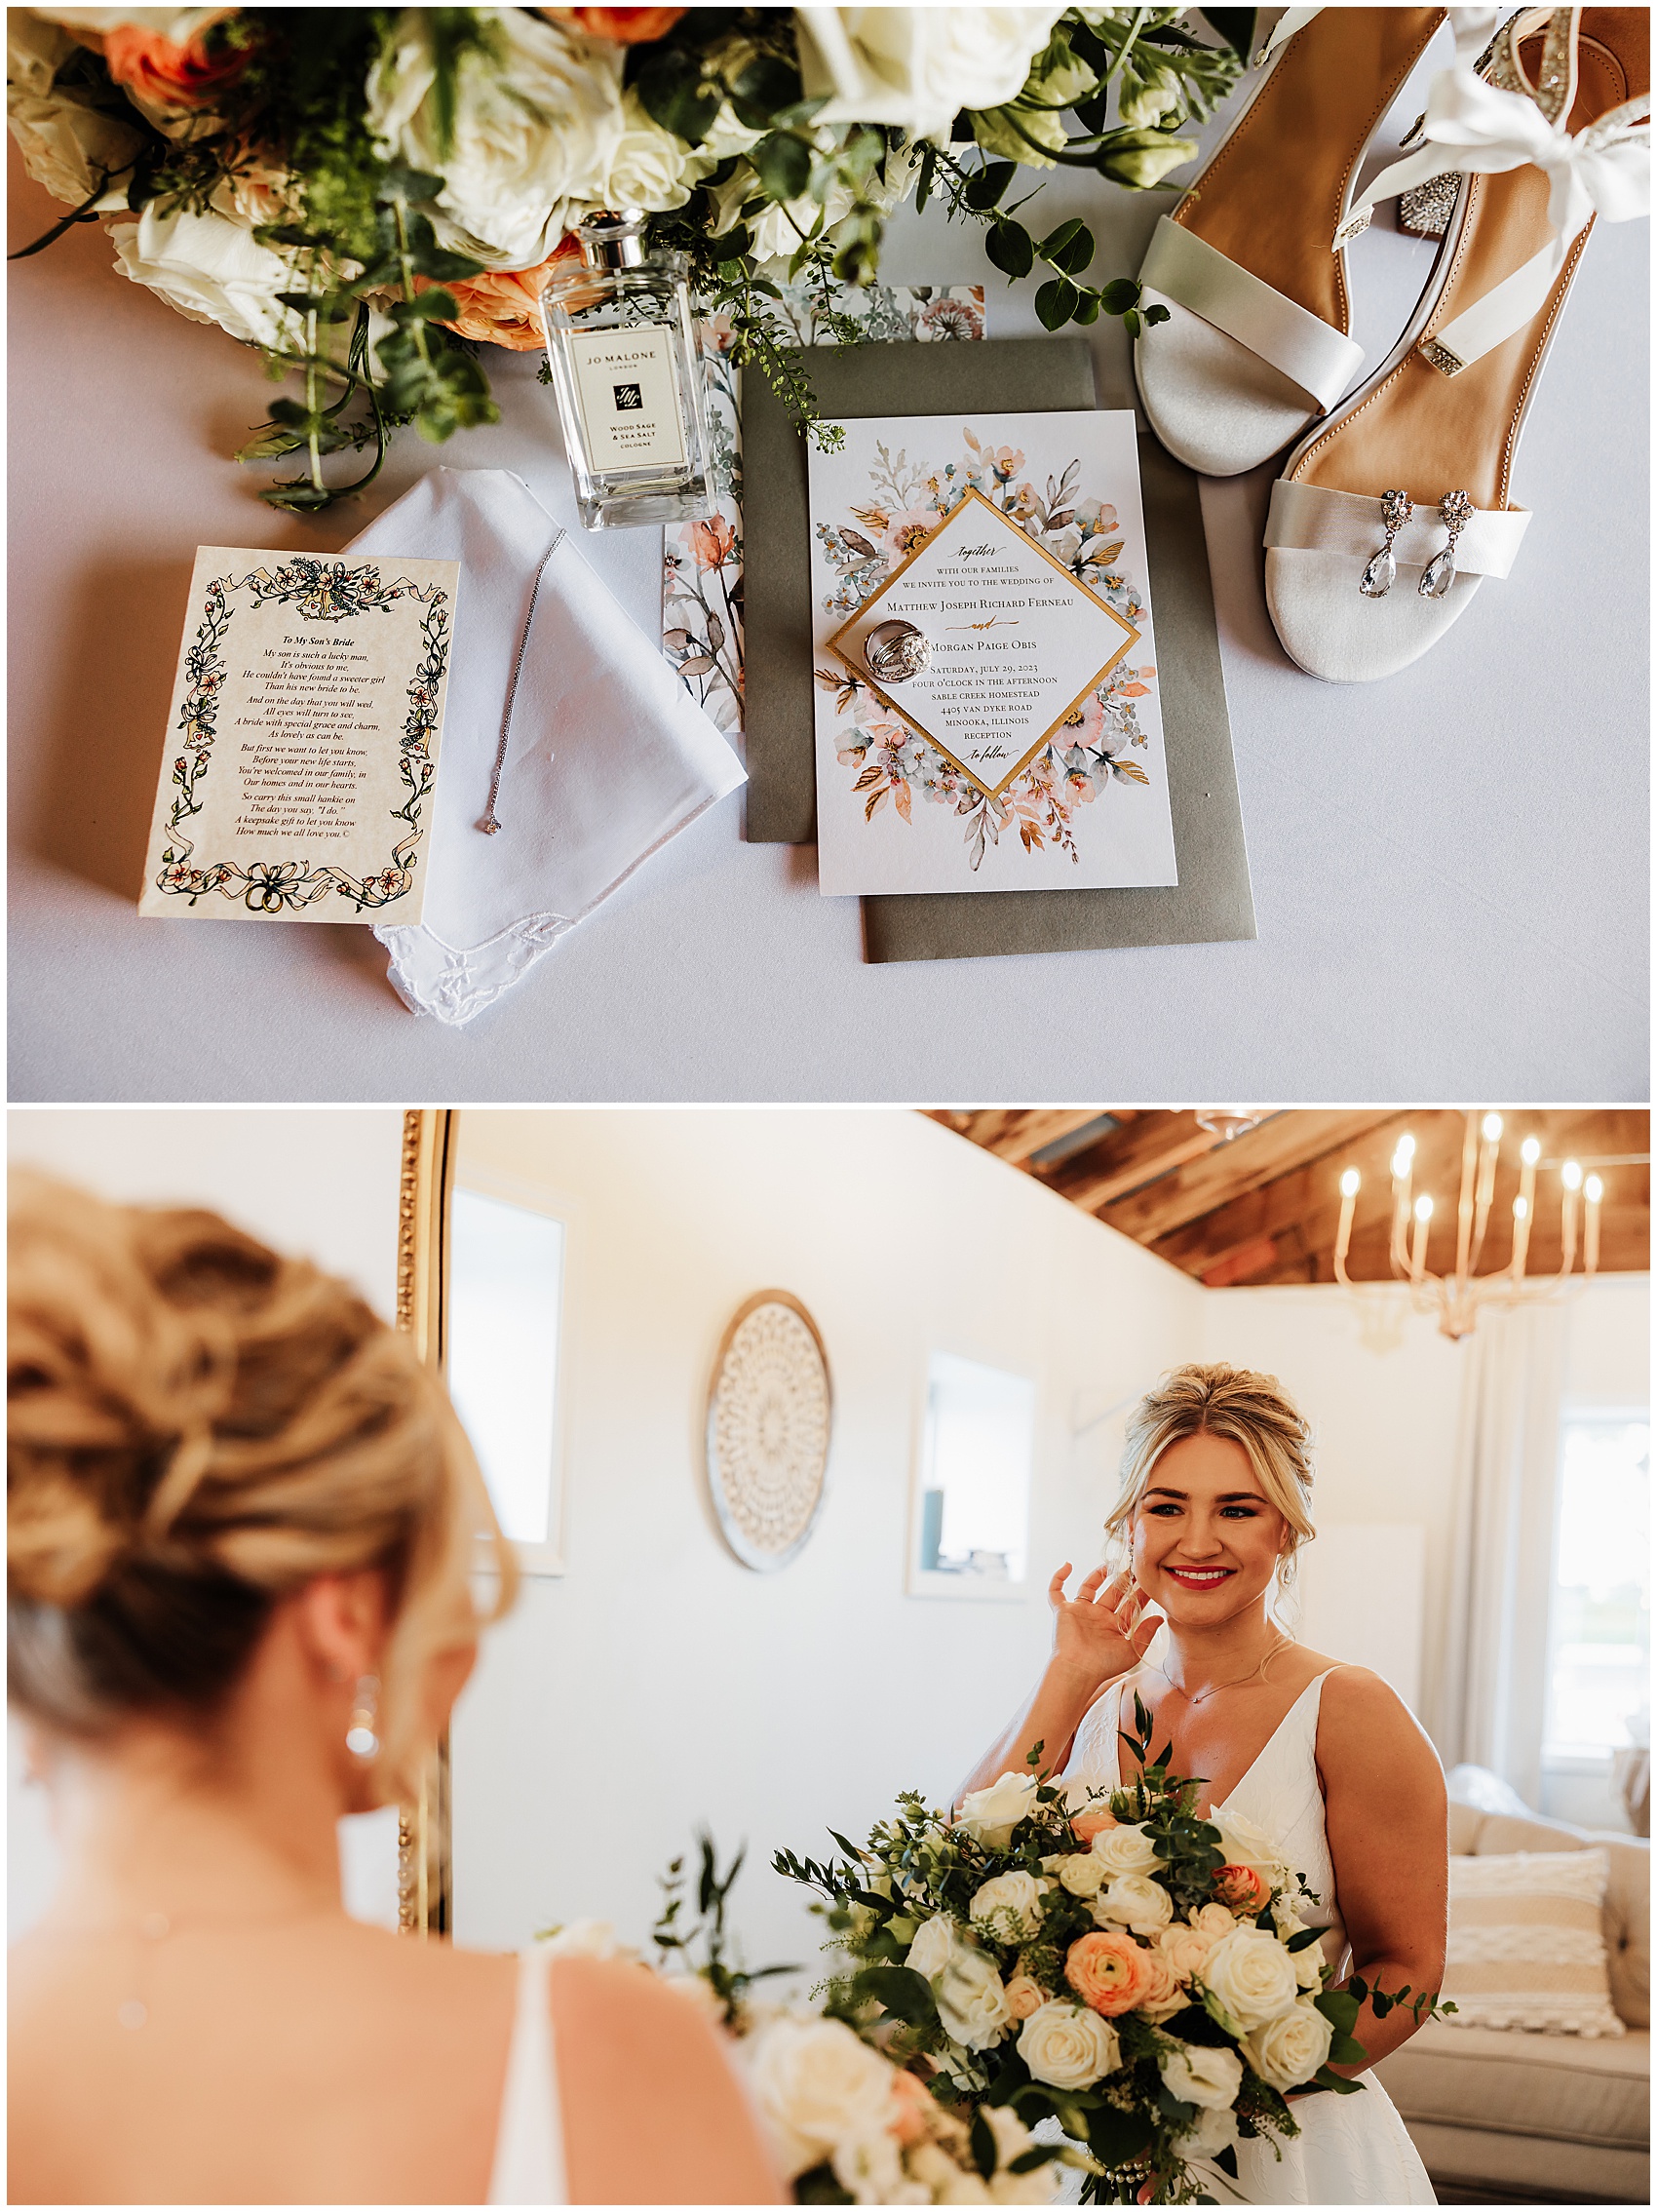 A bride holds her bouquet and adjusts her earrings in a mirror